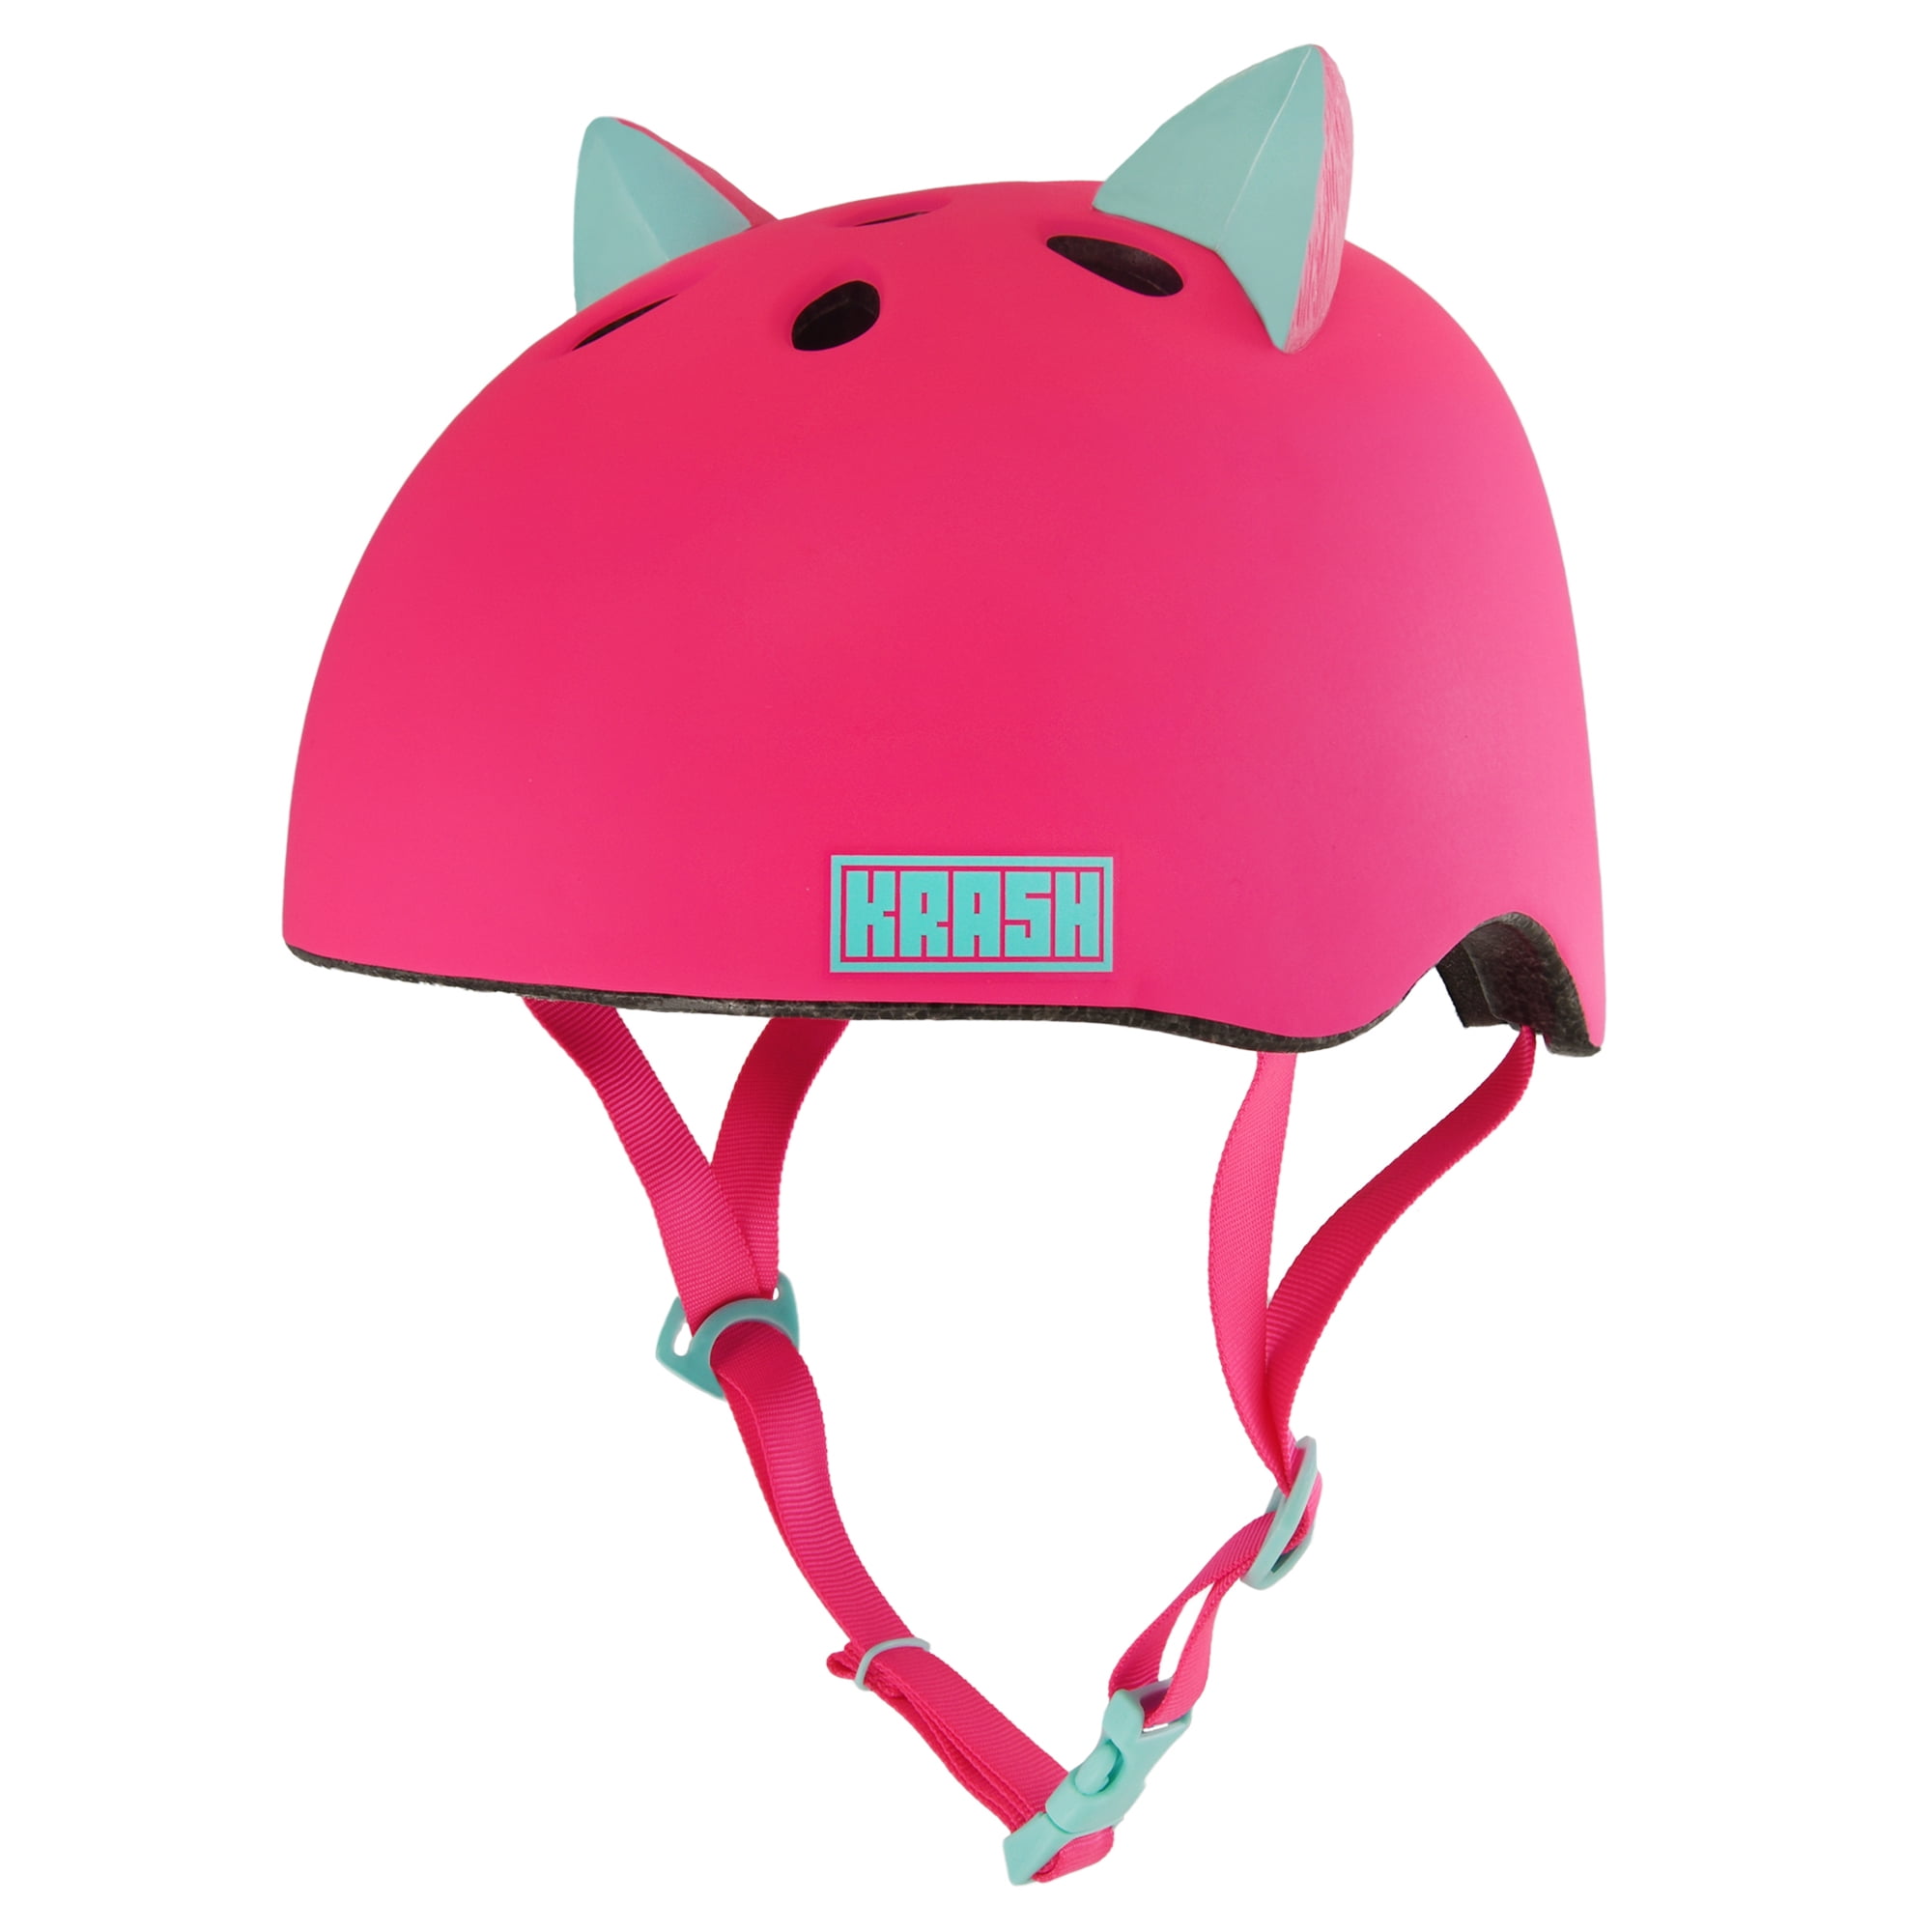 Details about   Krash Bright Meow Pink/Teal Helmet Youth 8+ 54-58cm 